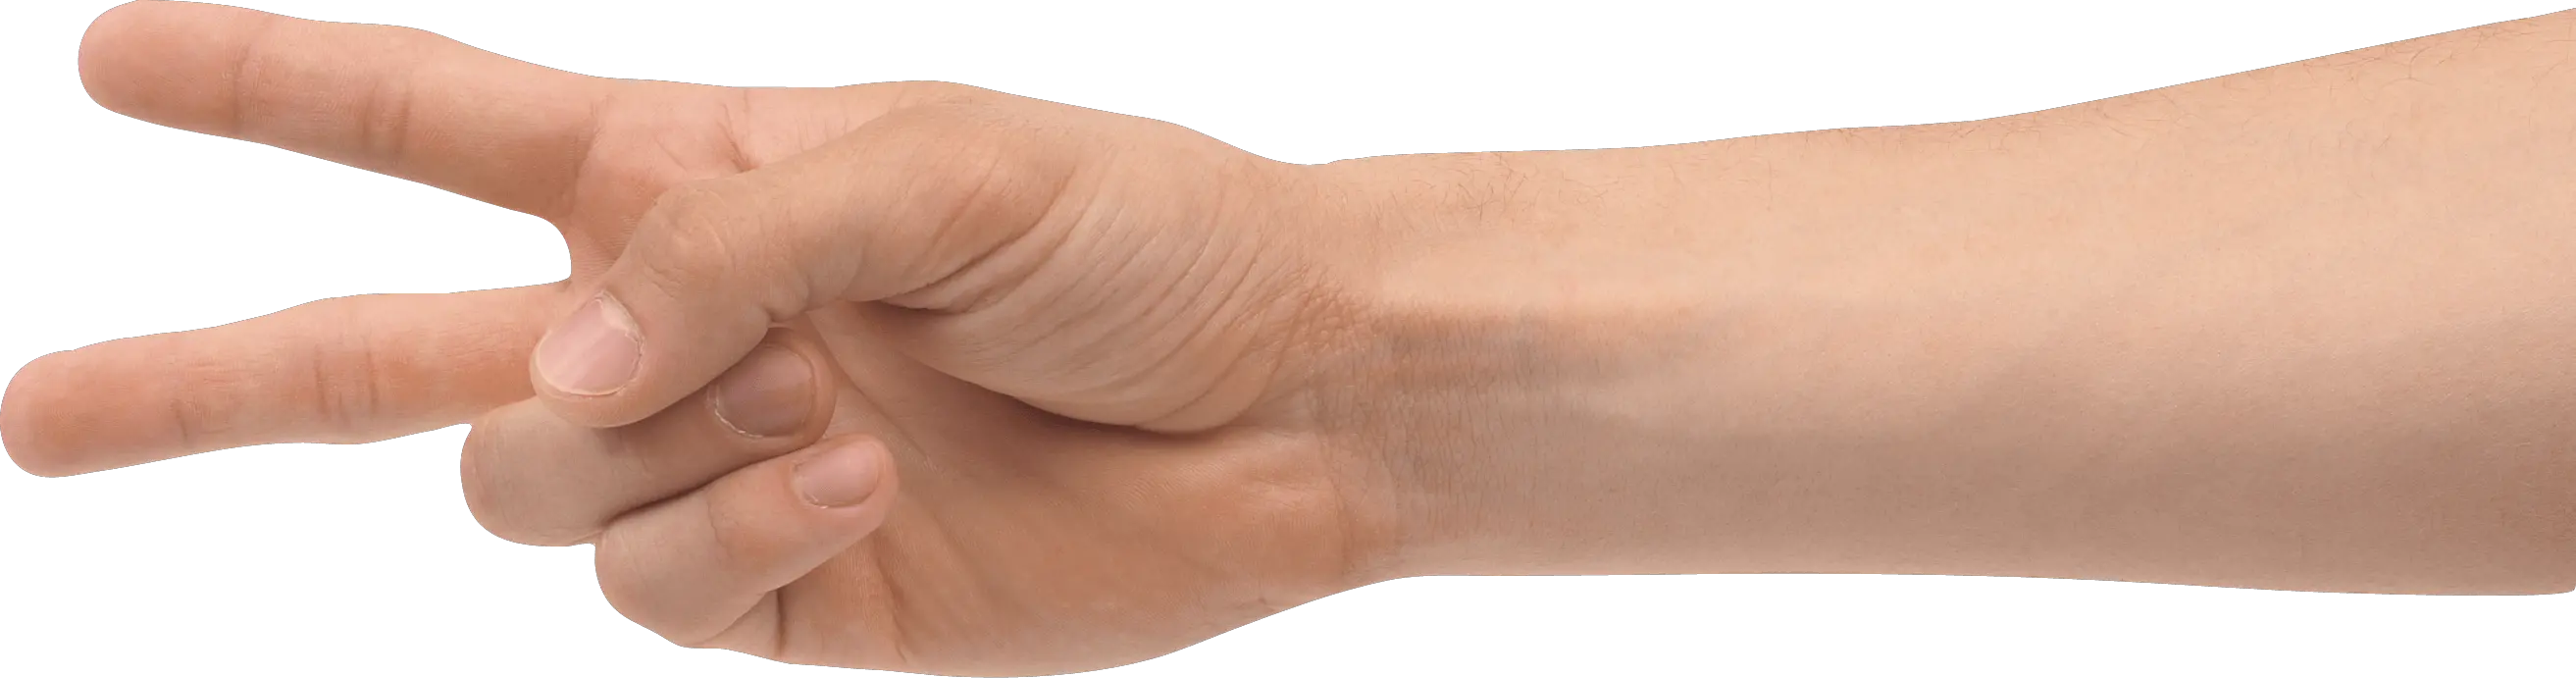 Family Hands Png